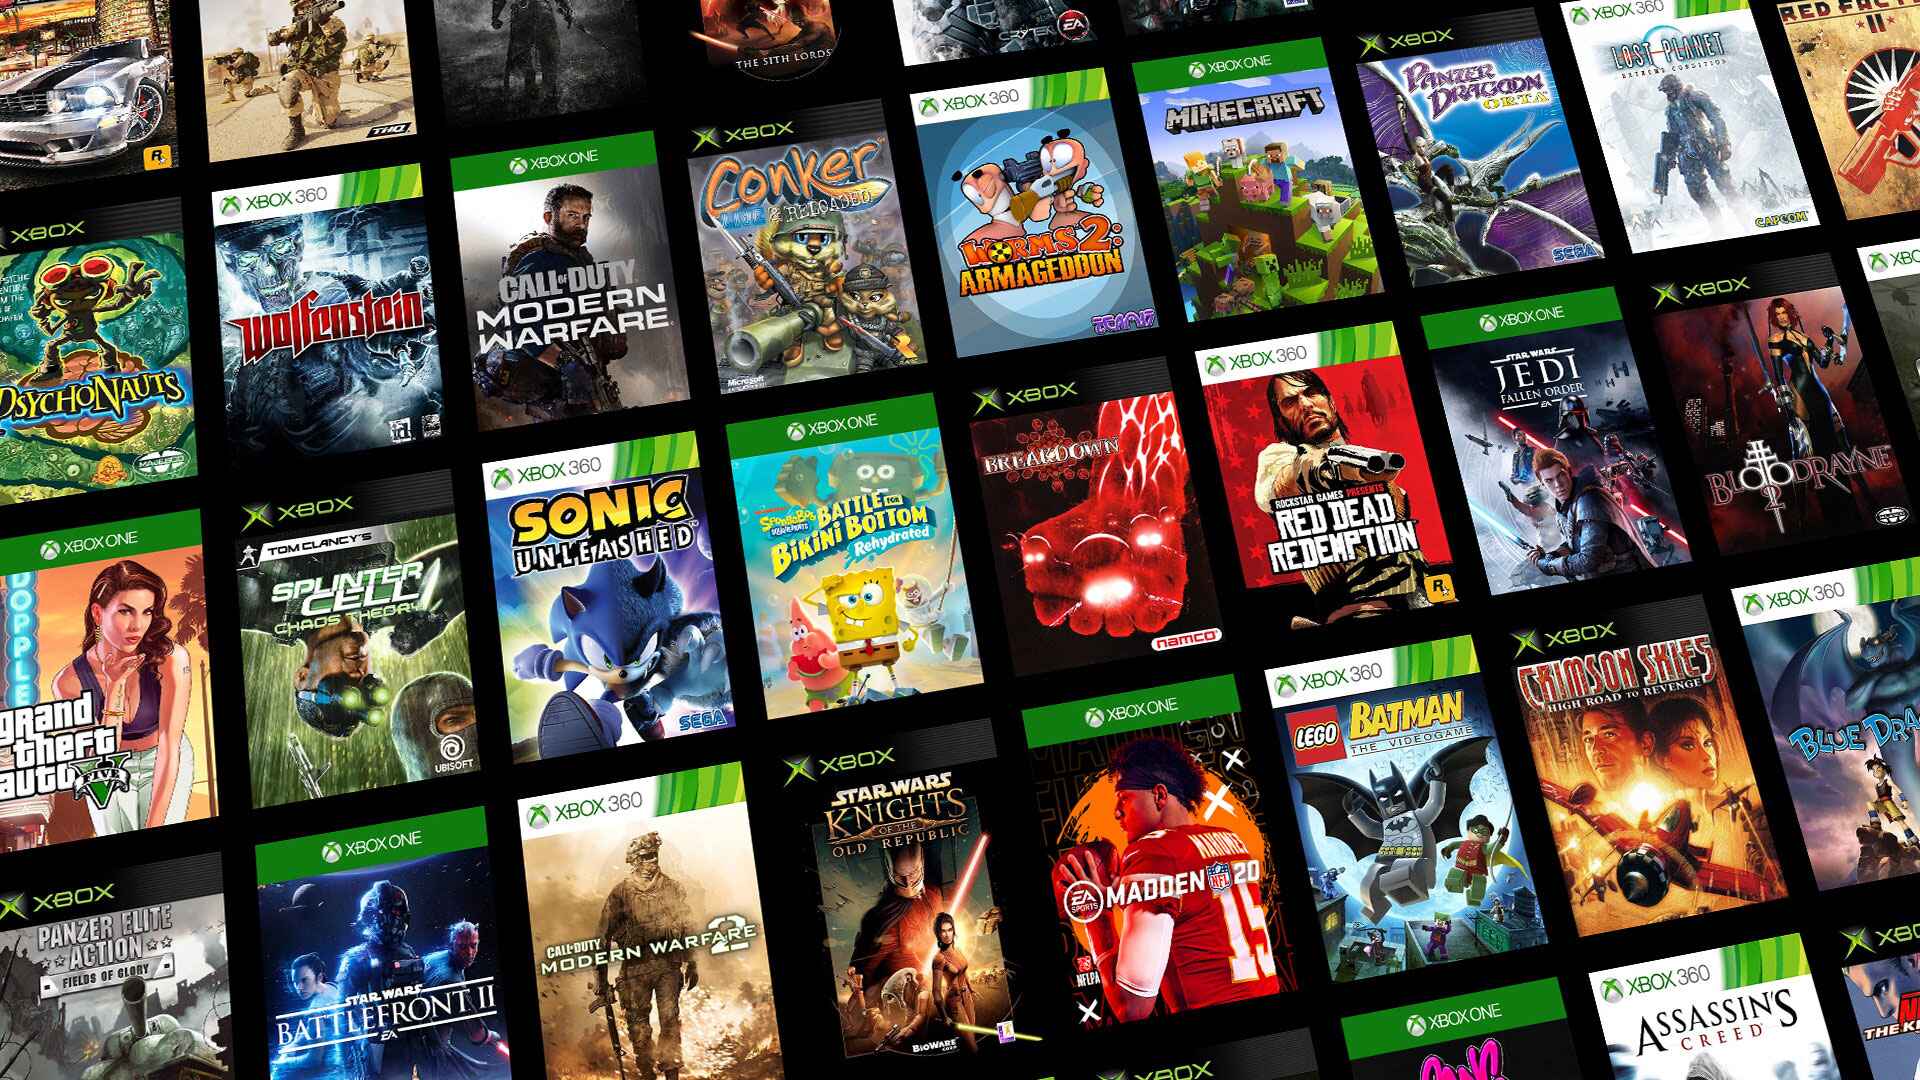 HOW TO DOWNLOAD FREE GAMES ON EASY XBOX 360 